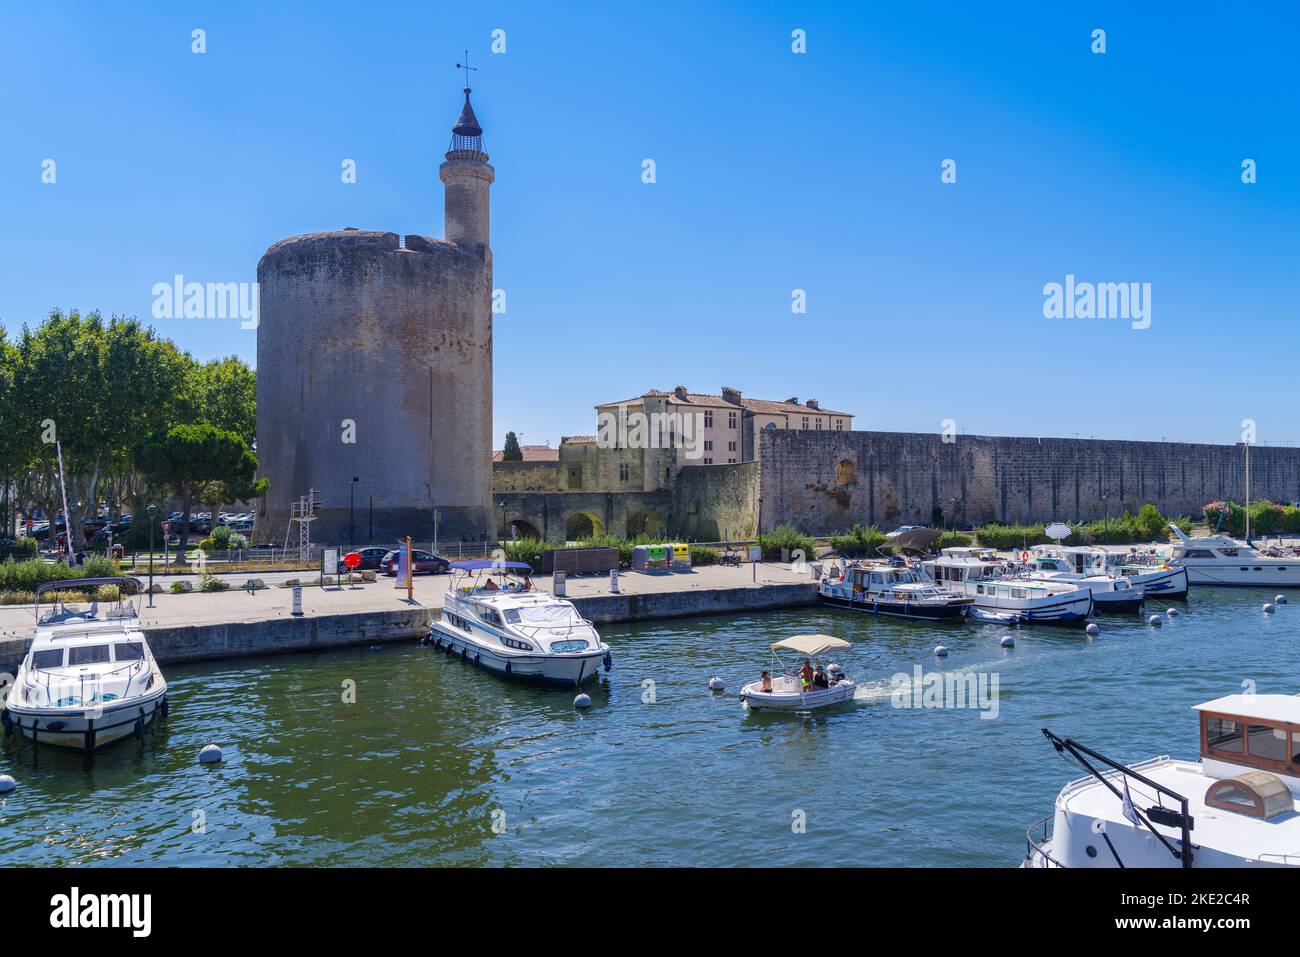 AIGUES-MORTES, FRANCE - AUGUST 4, 2022: View on the old medieval wall and tower of the city Stock Photo